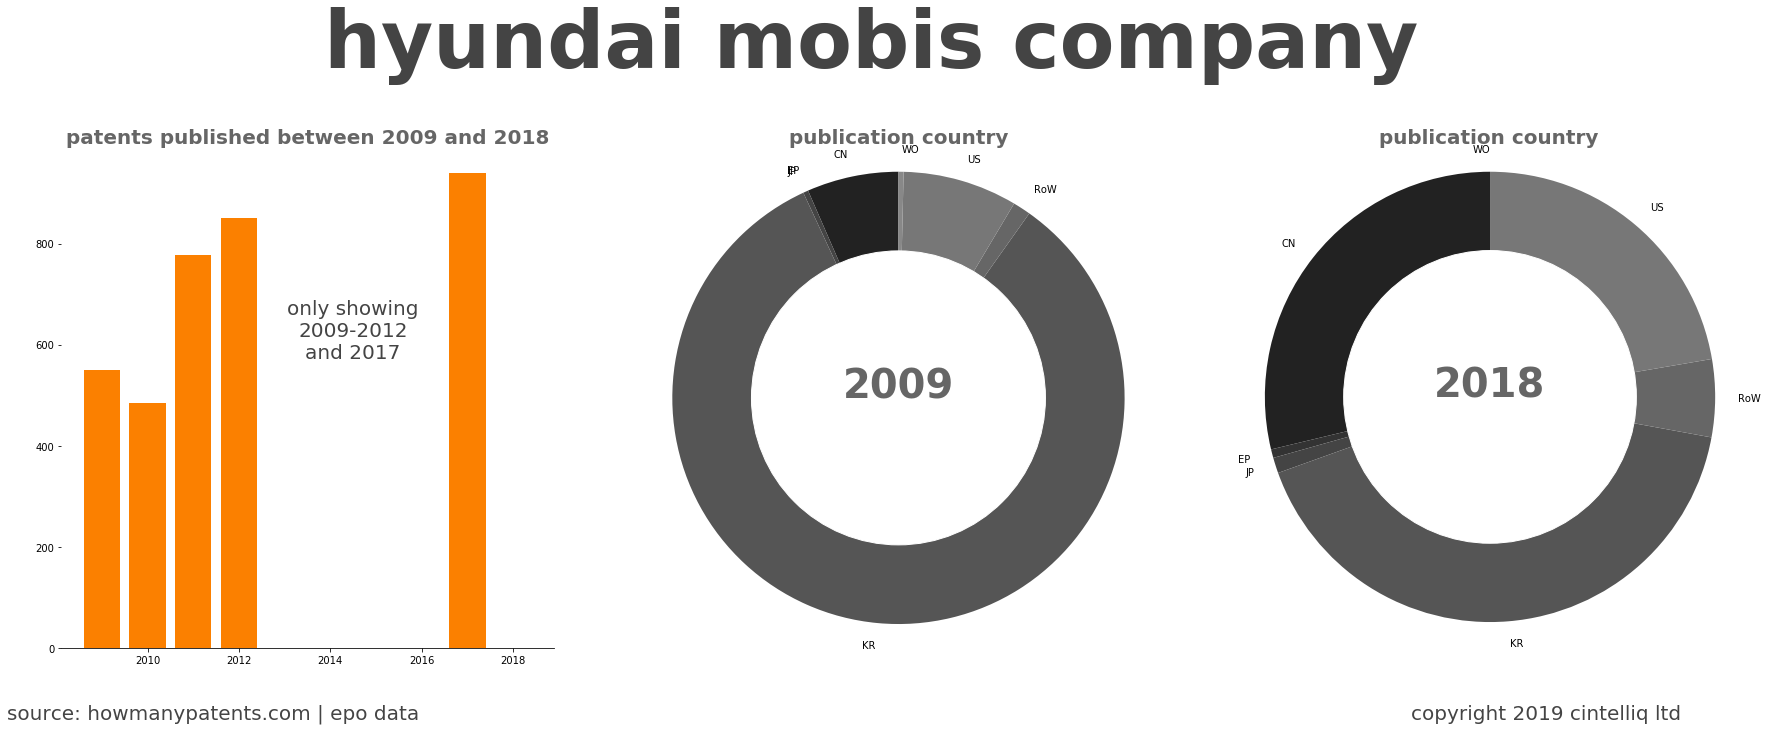 summary of patents for Hyundai Mobis Company